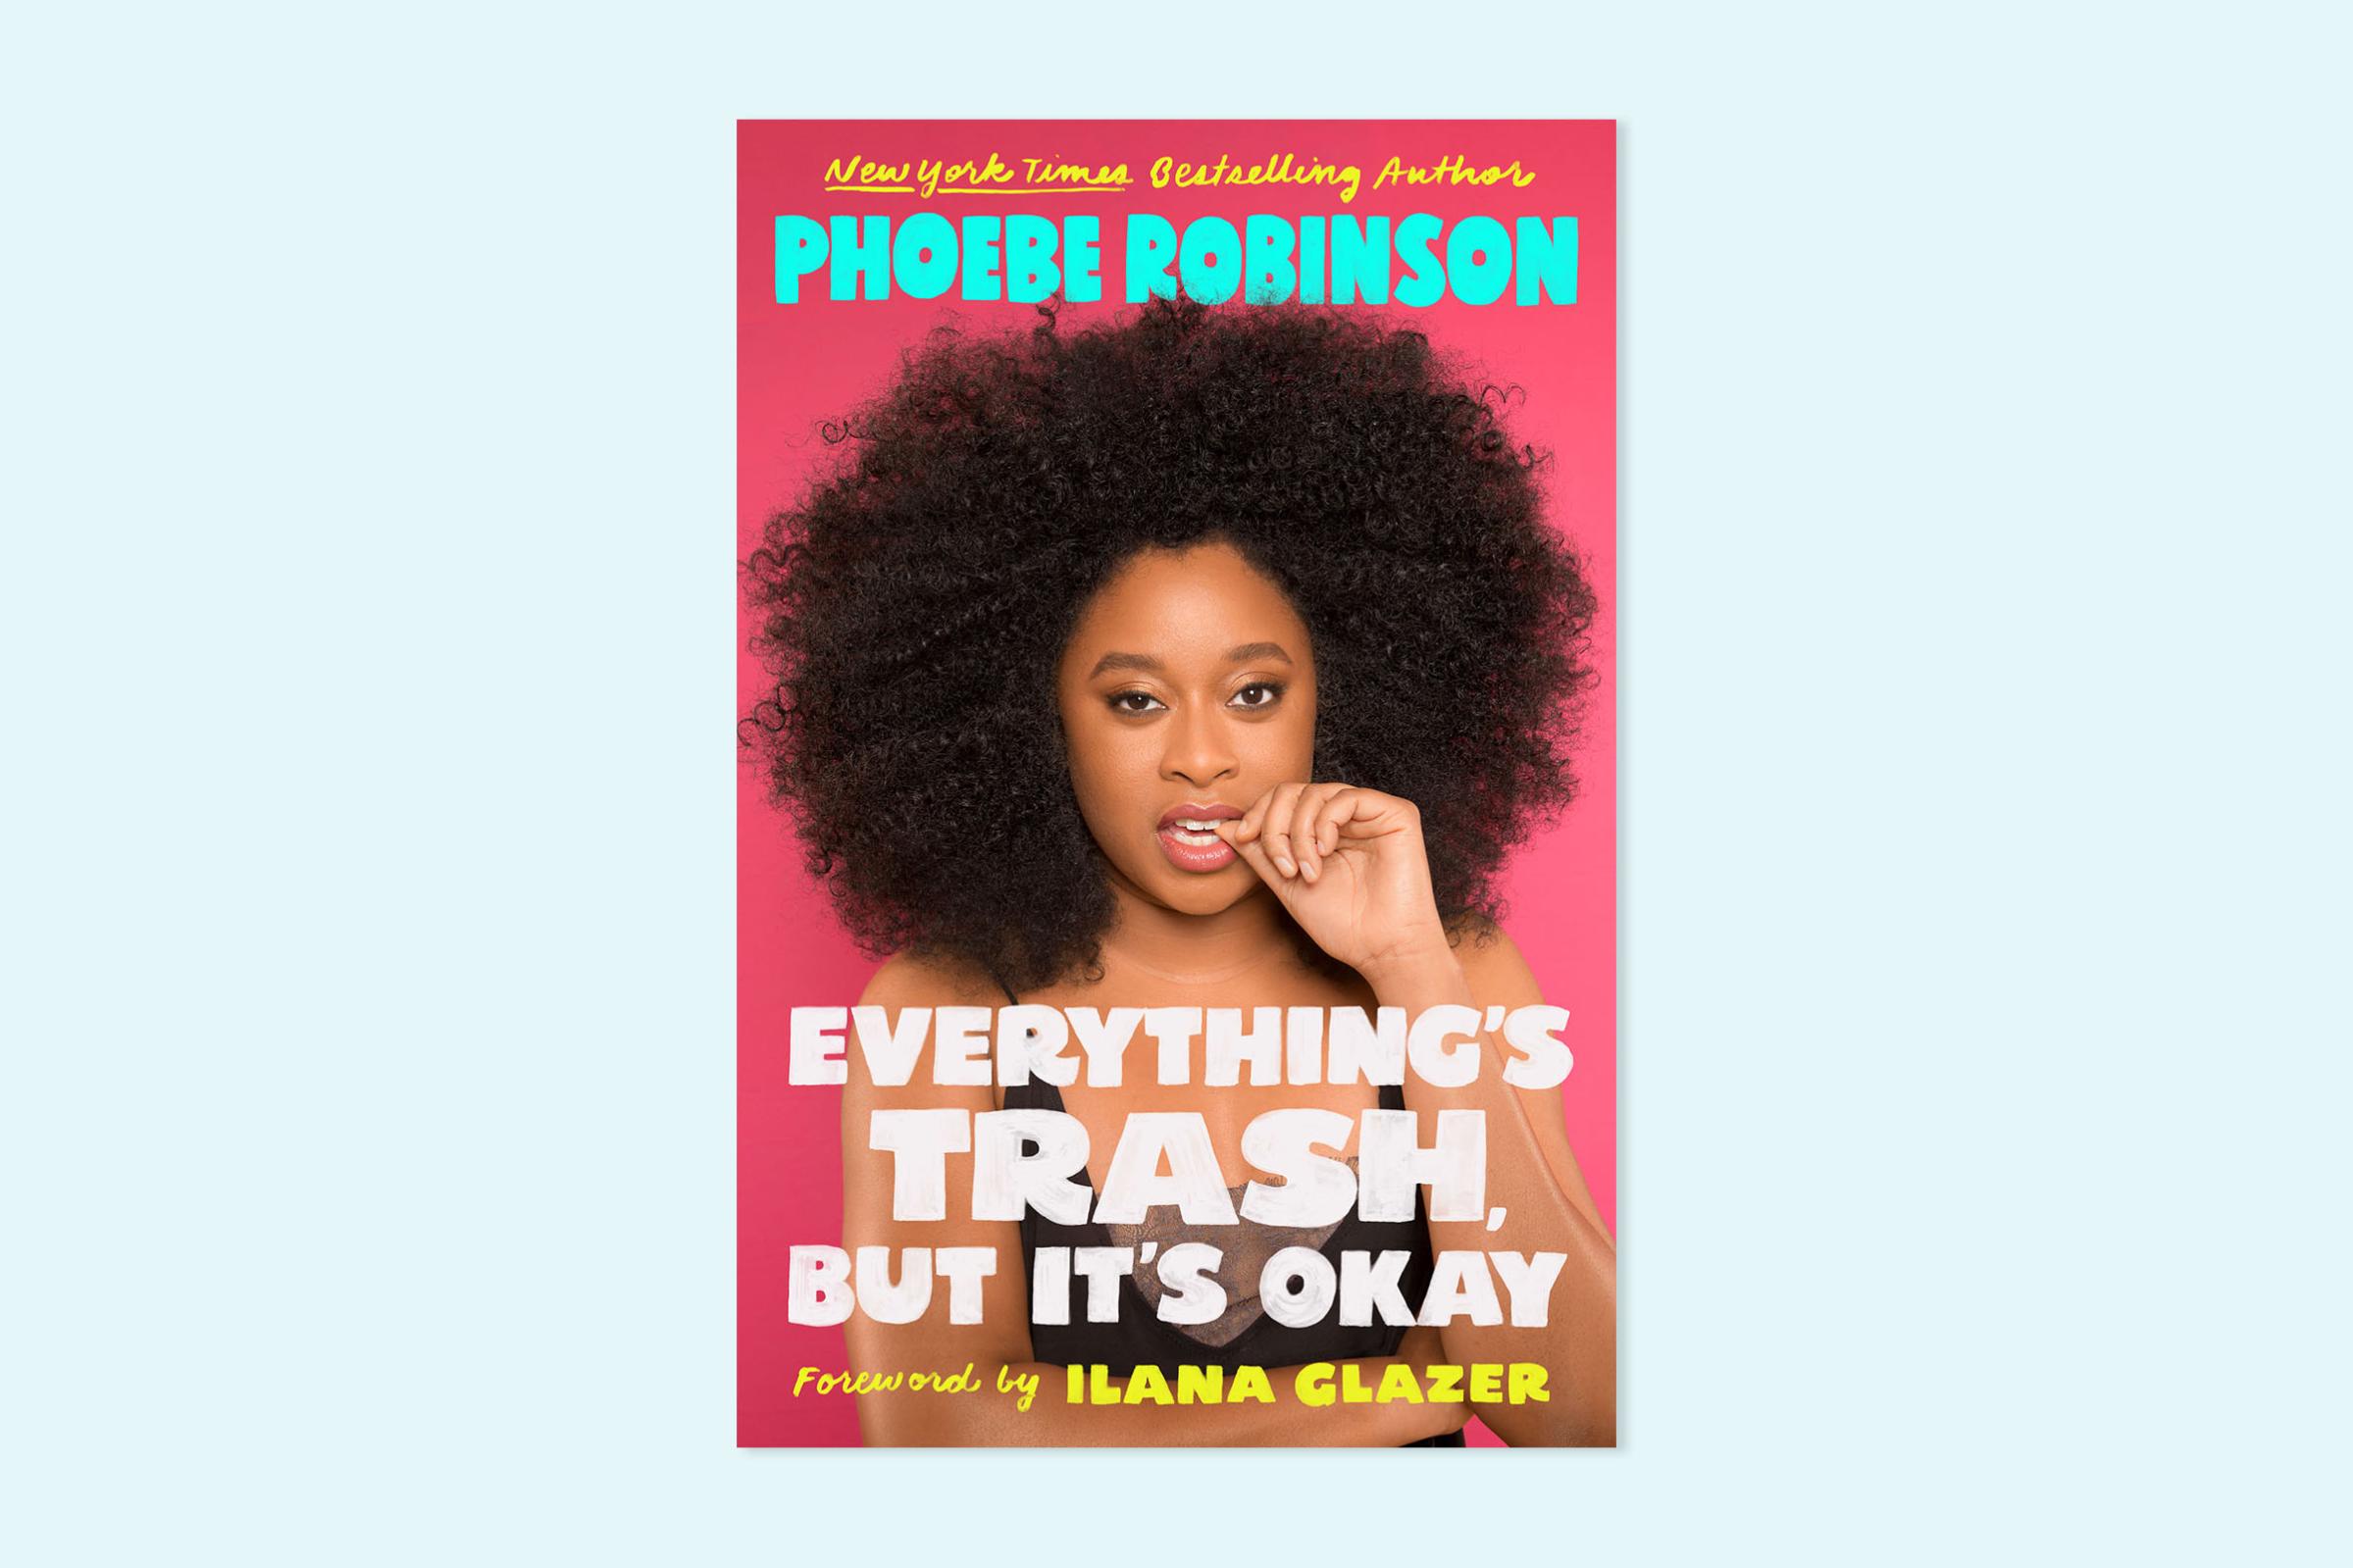 Everything's Trash But It's Okay by Phoebe Robinson